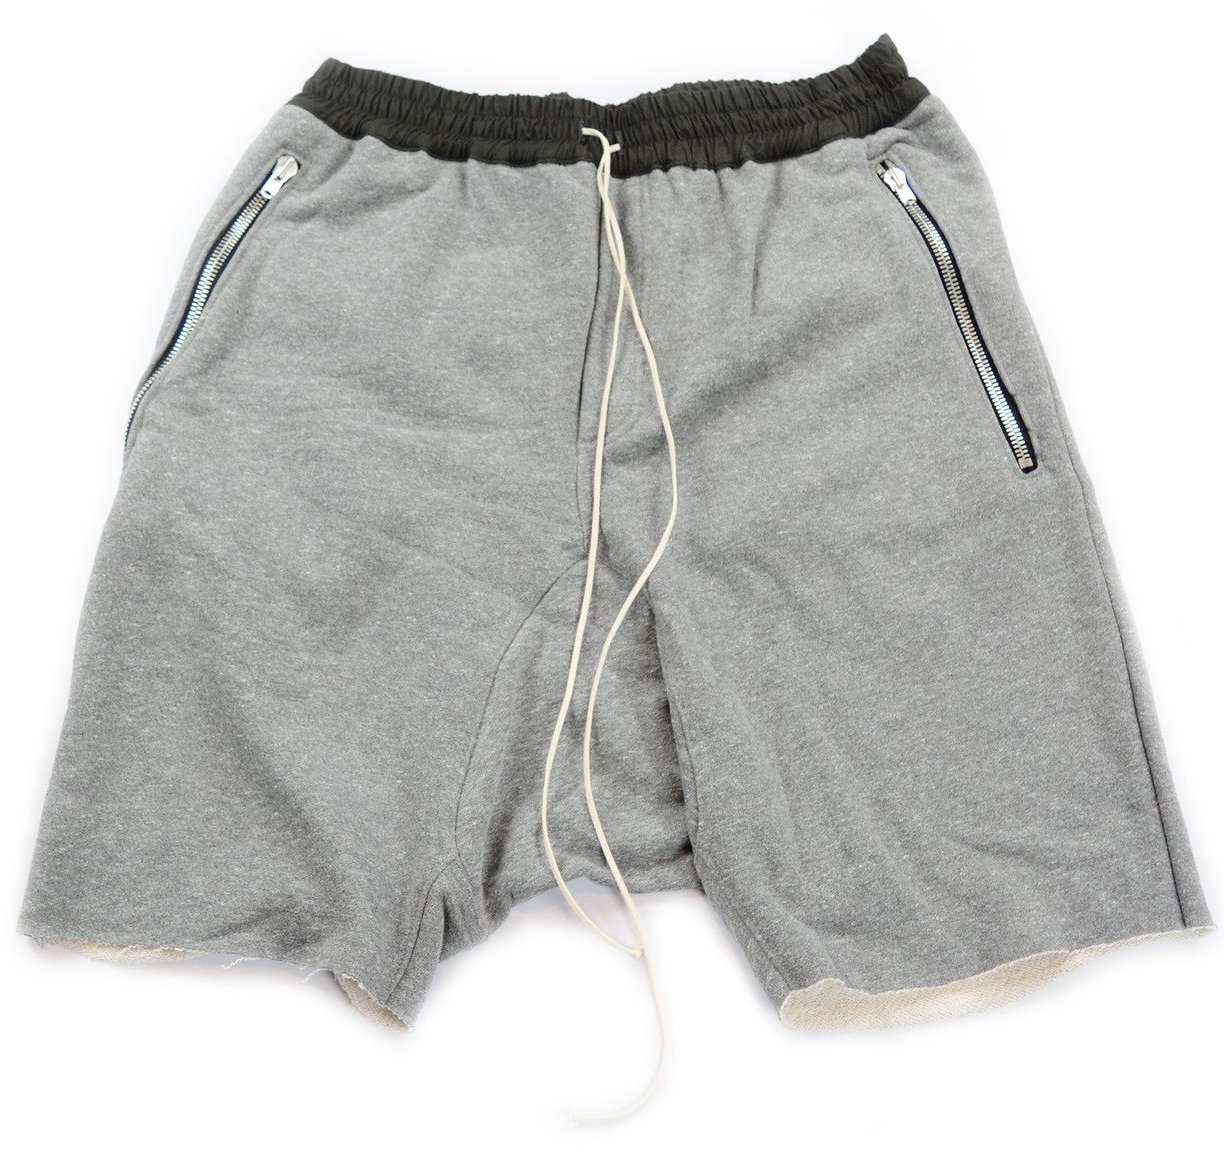 FEAR OF GOD Drop Shorts Heather Grey Men's - Fourth Collection - US